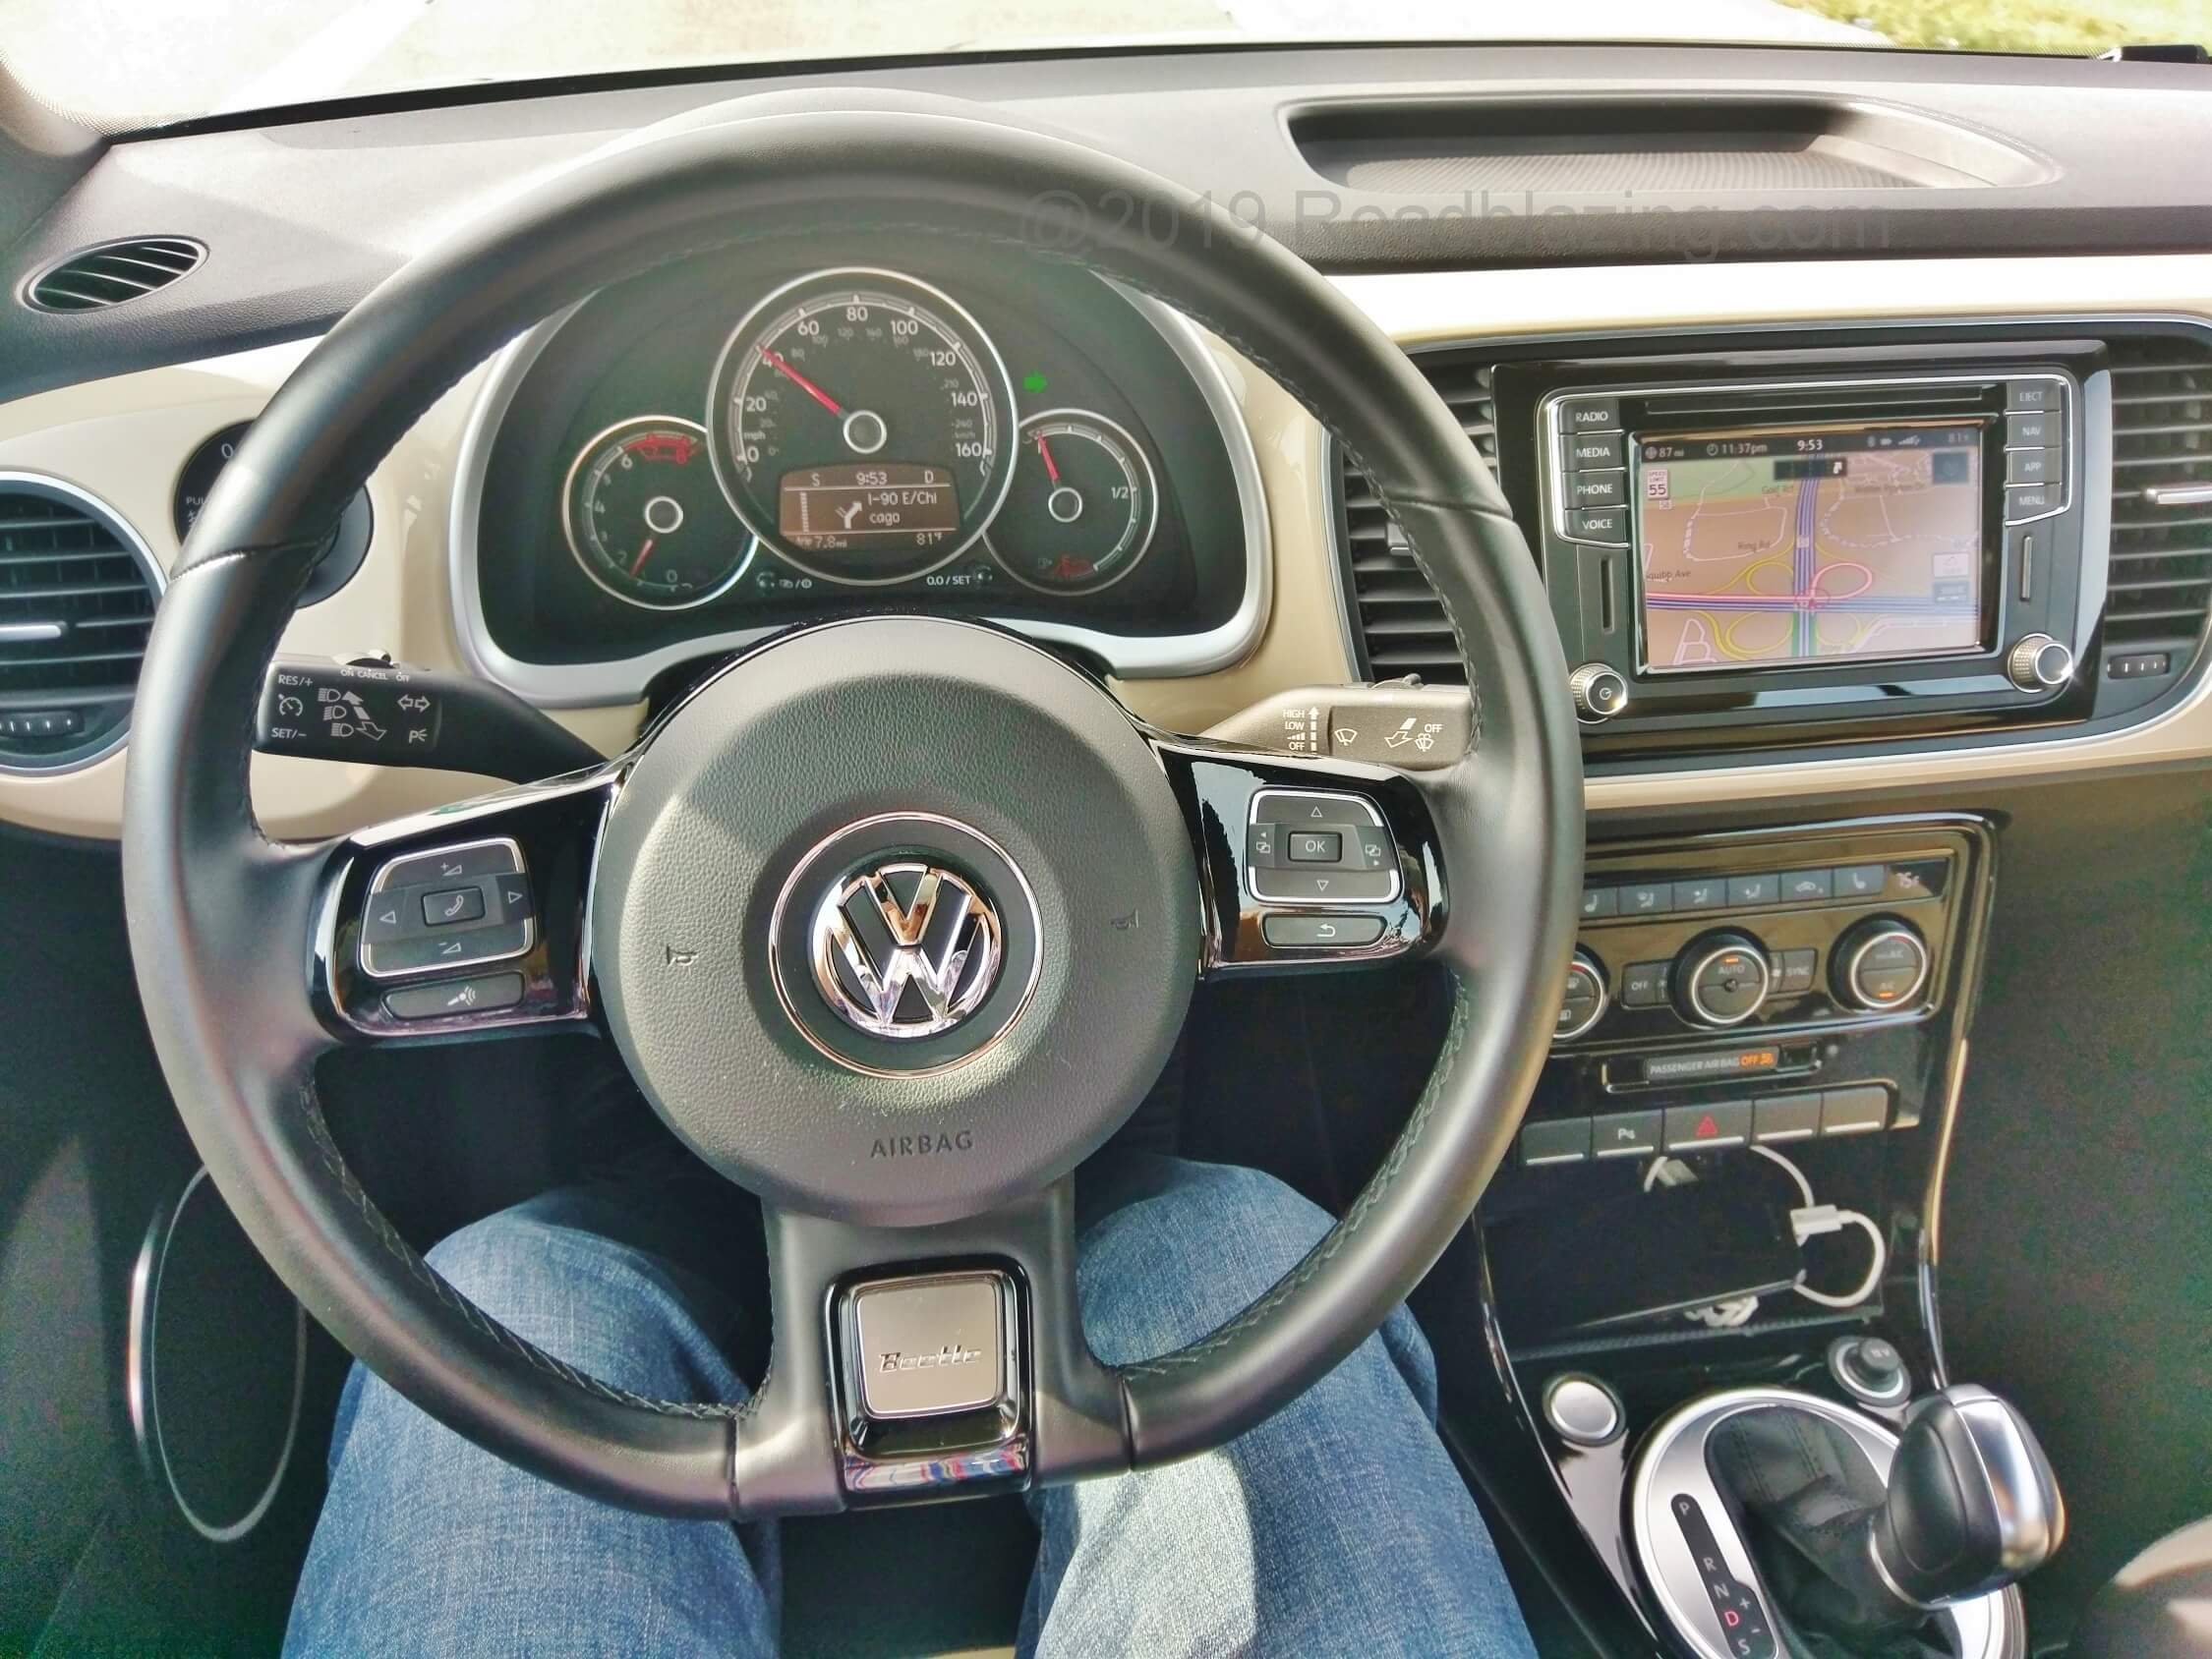 2019 Volkswagen Beetle Convertible Final Edition SEL: Instrumentation suffering sun wash during top up drive